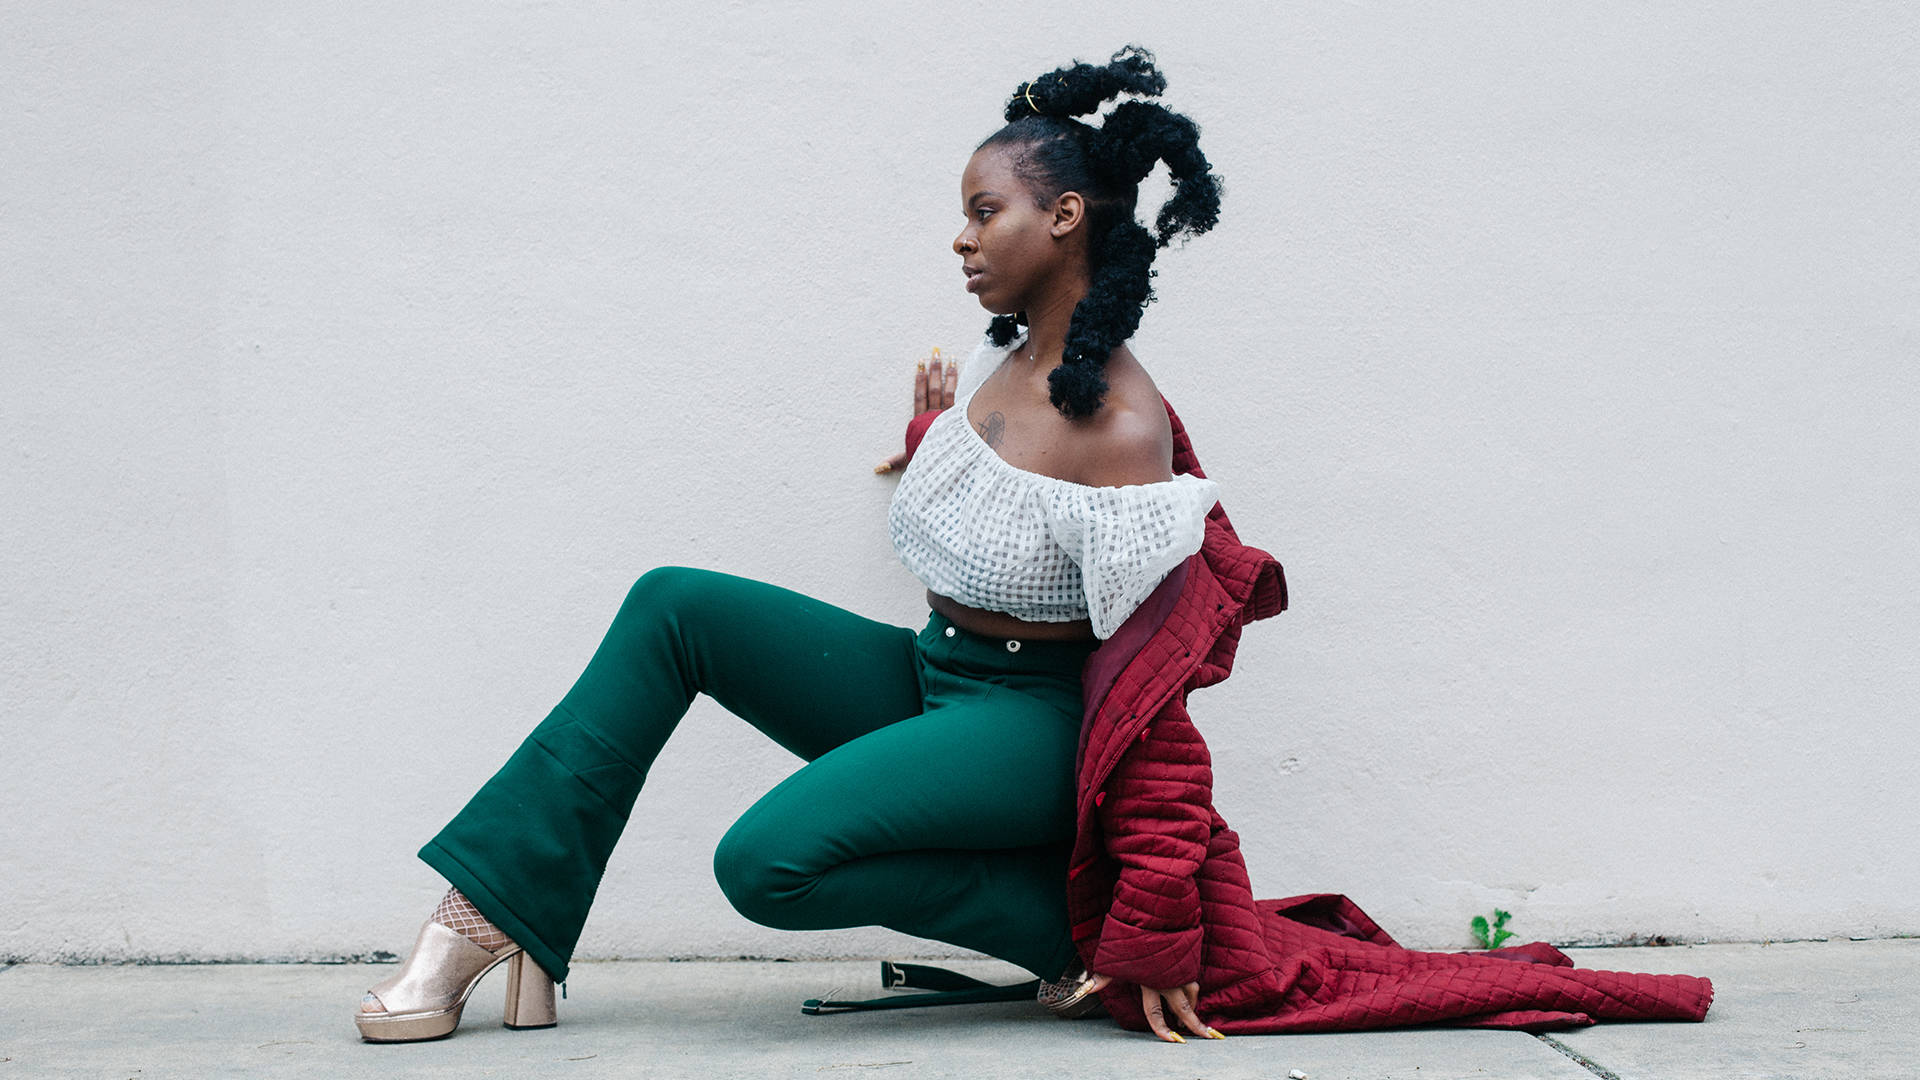 On her spiritually rooted sophomore EP, 'Flavor of Green,' Queens D.Light grapples with uncertainty. Adrian Octavius Walker